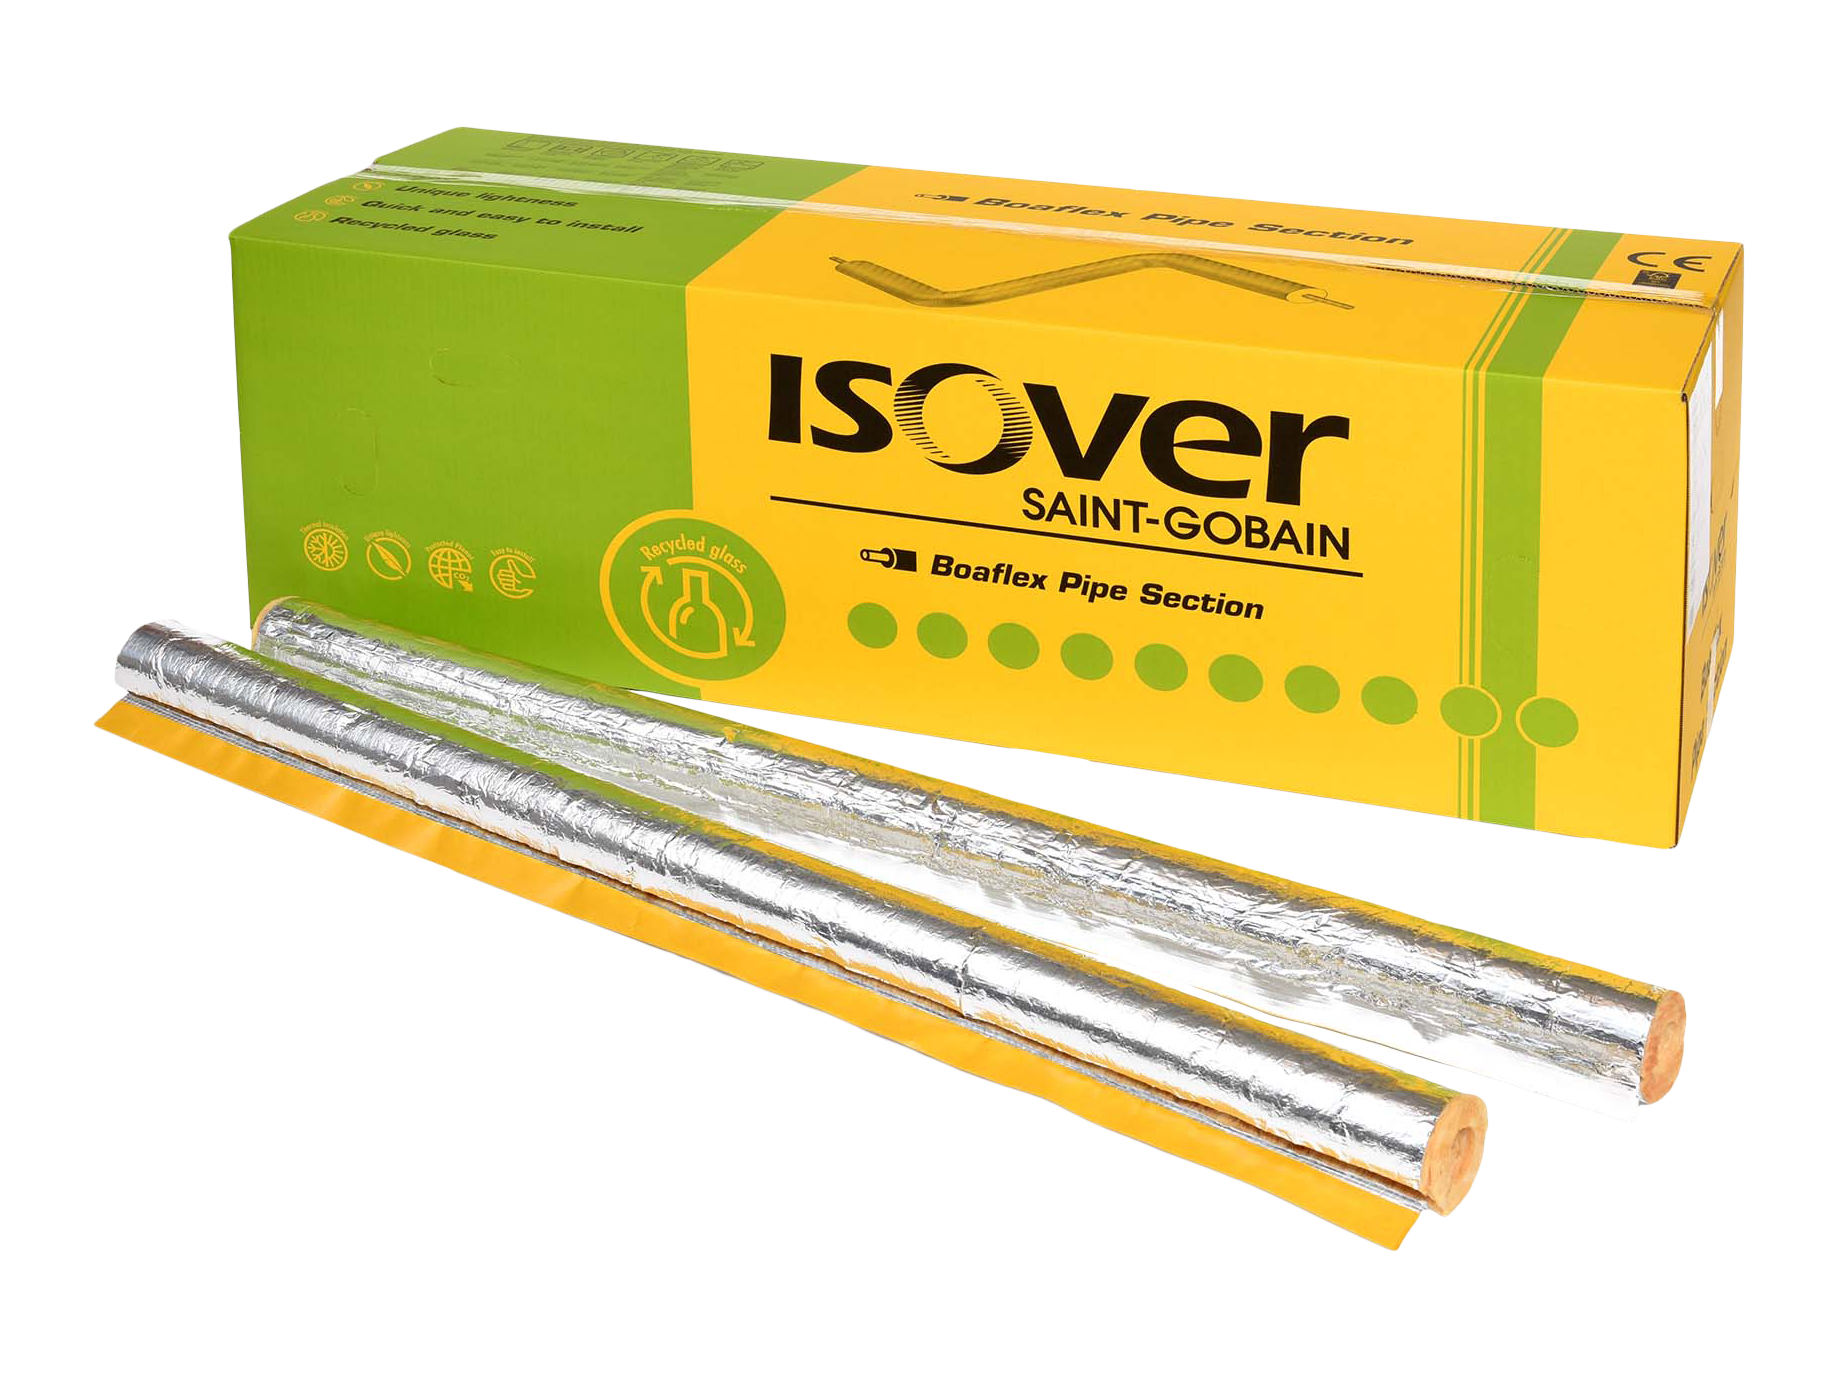 ISOVER Boaflex Pipe Section 35/30